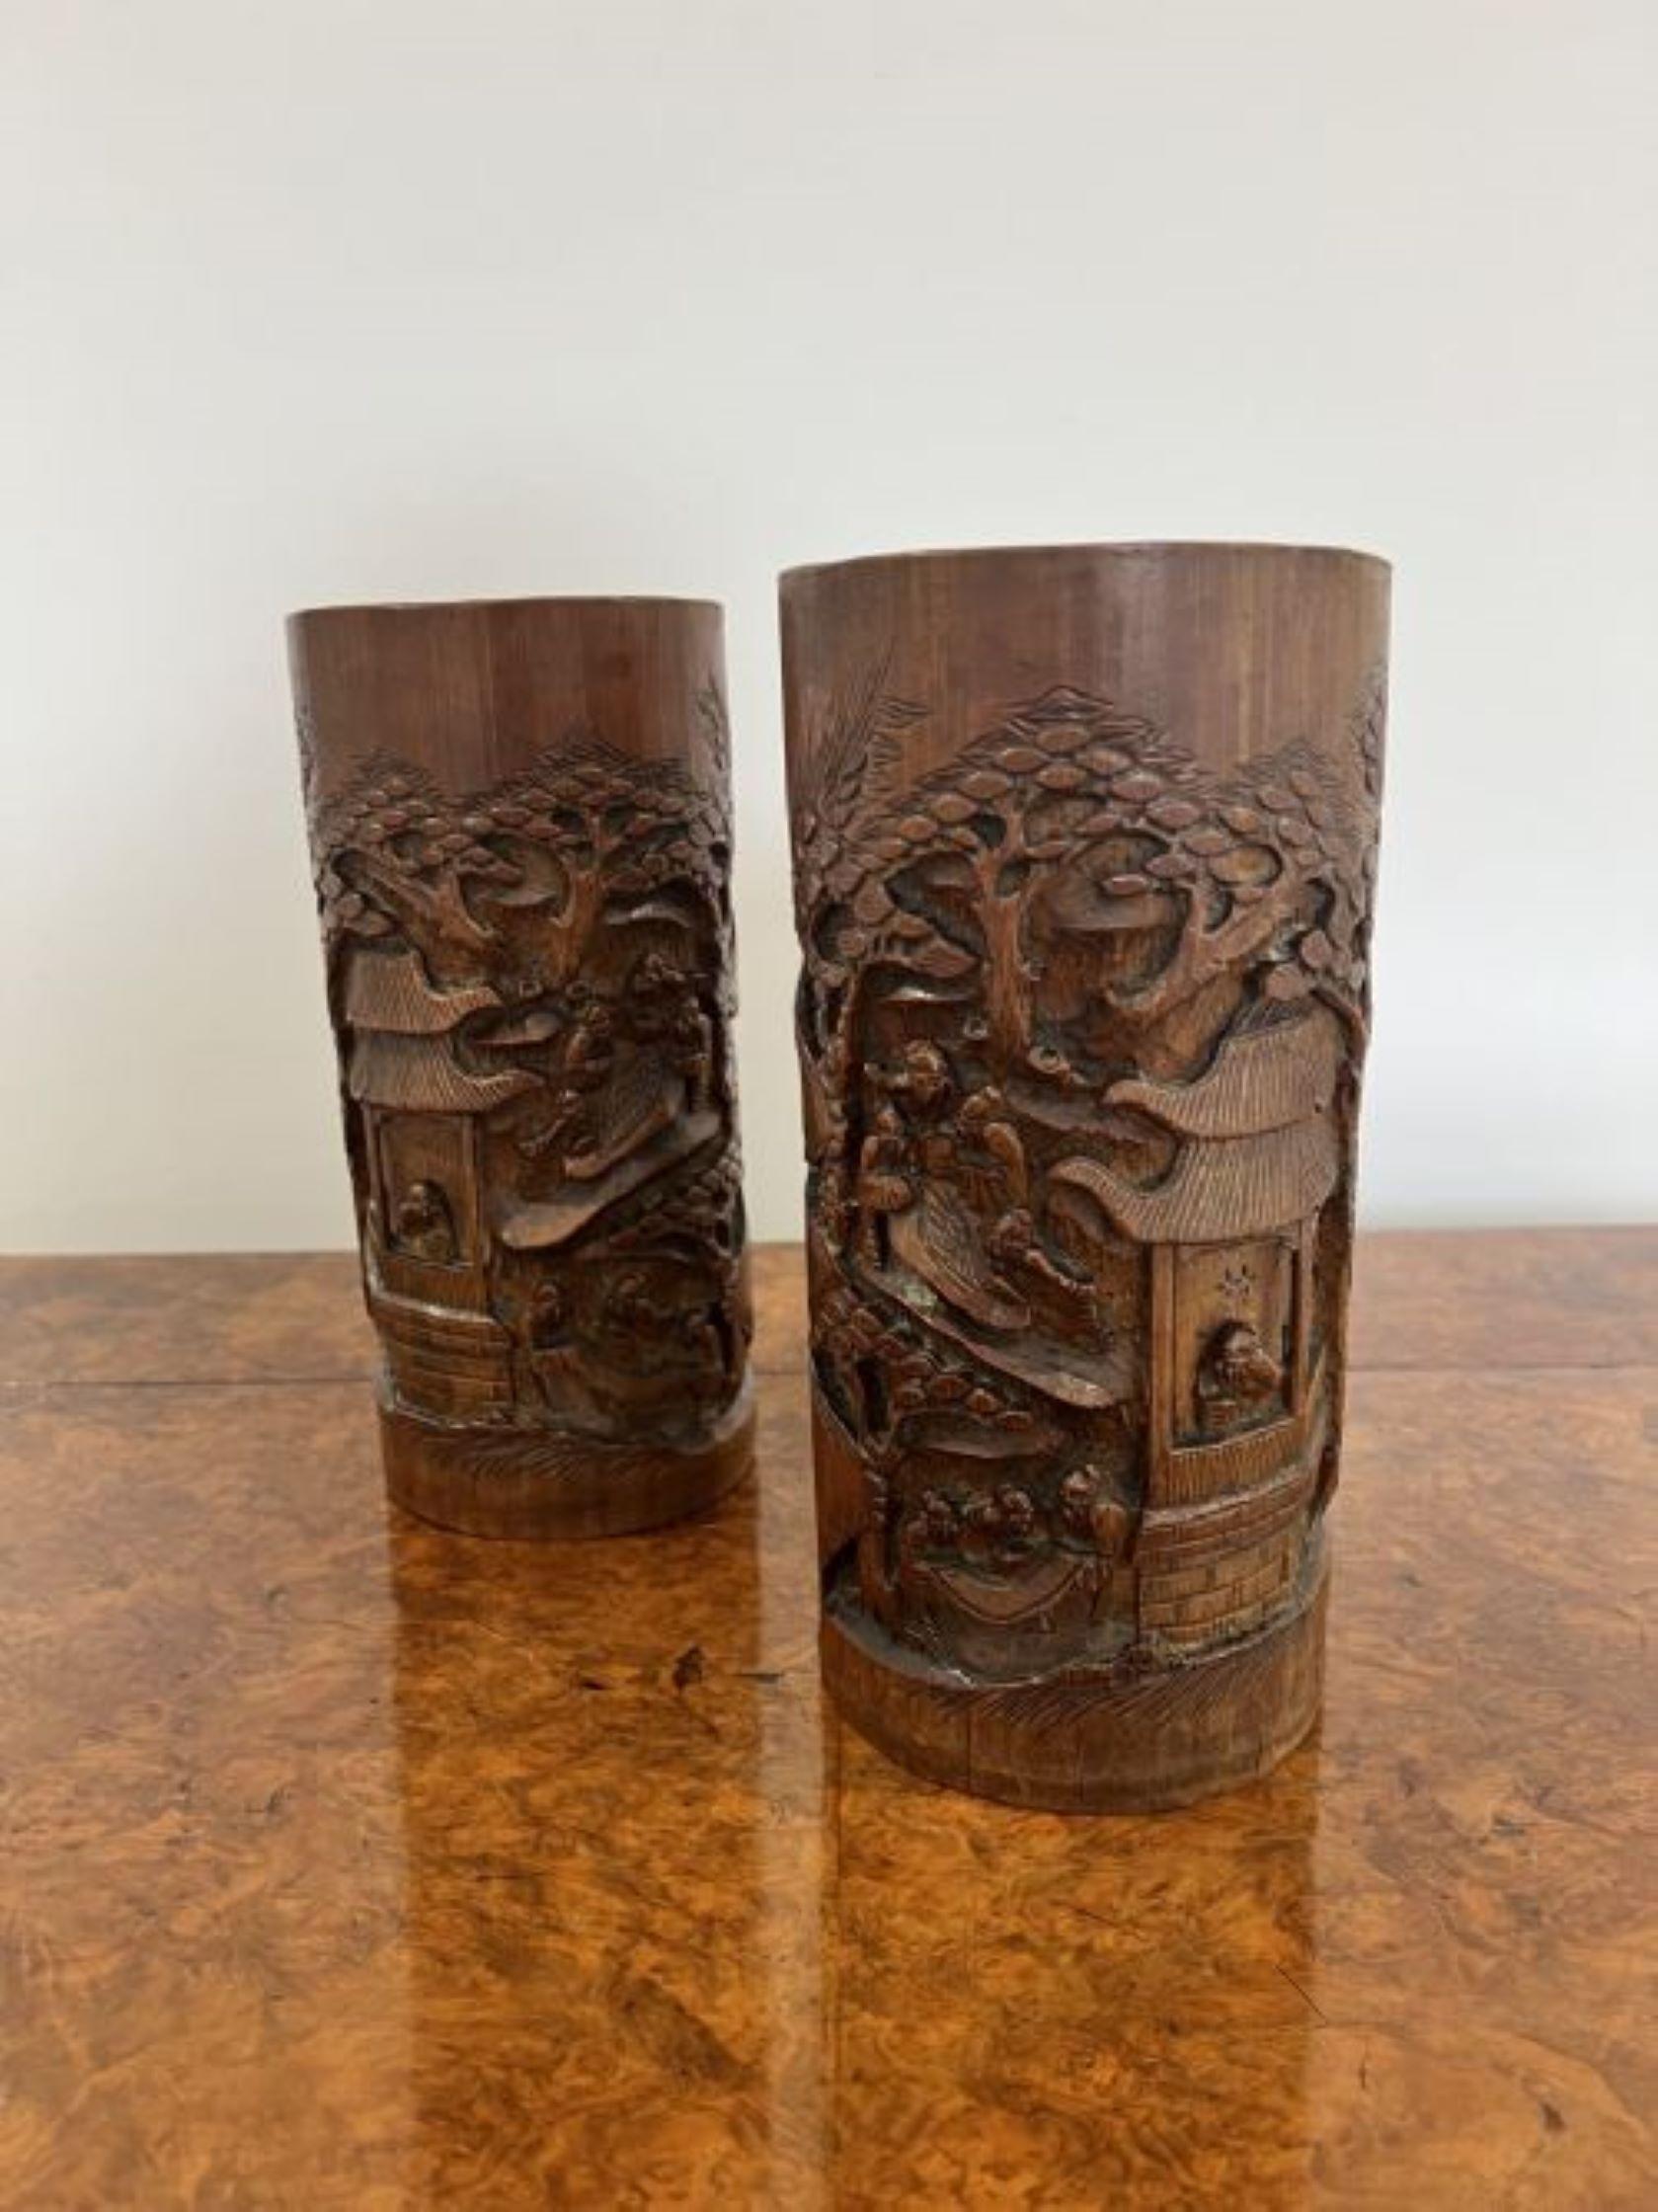 Stunning pair of antique Chinese quality carved bamboo brush pots having a quality pair of antique Chinese brush pots with quality carved decoration to the front with traditional scenes of figures, trees and a house.  